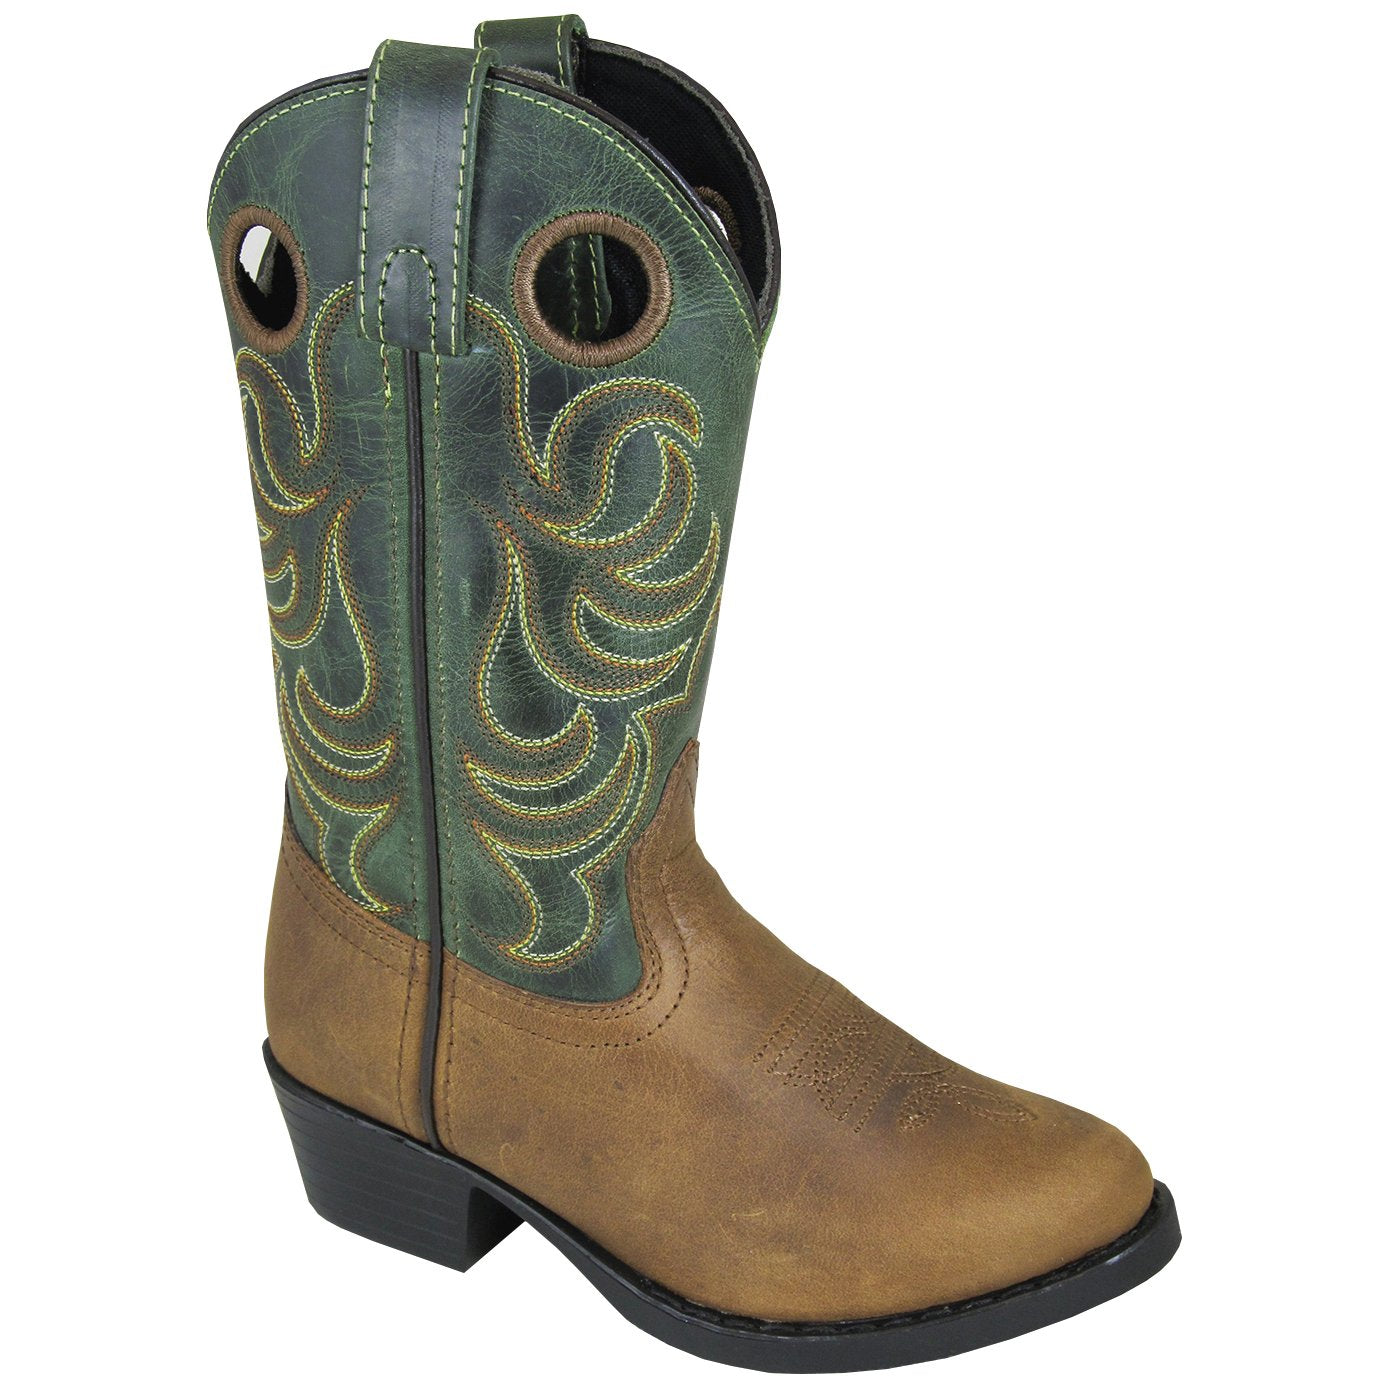 Smoky Mountain Children's Henry Brown Distress/Green Crackle Cowboy Boot